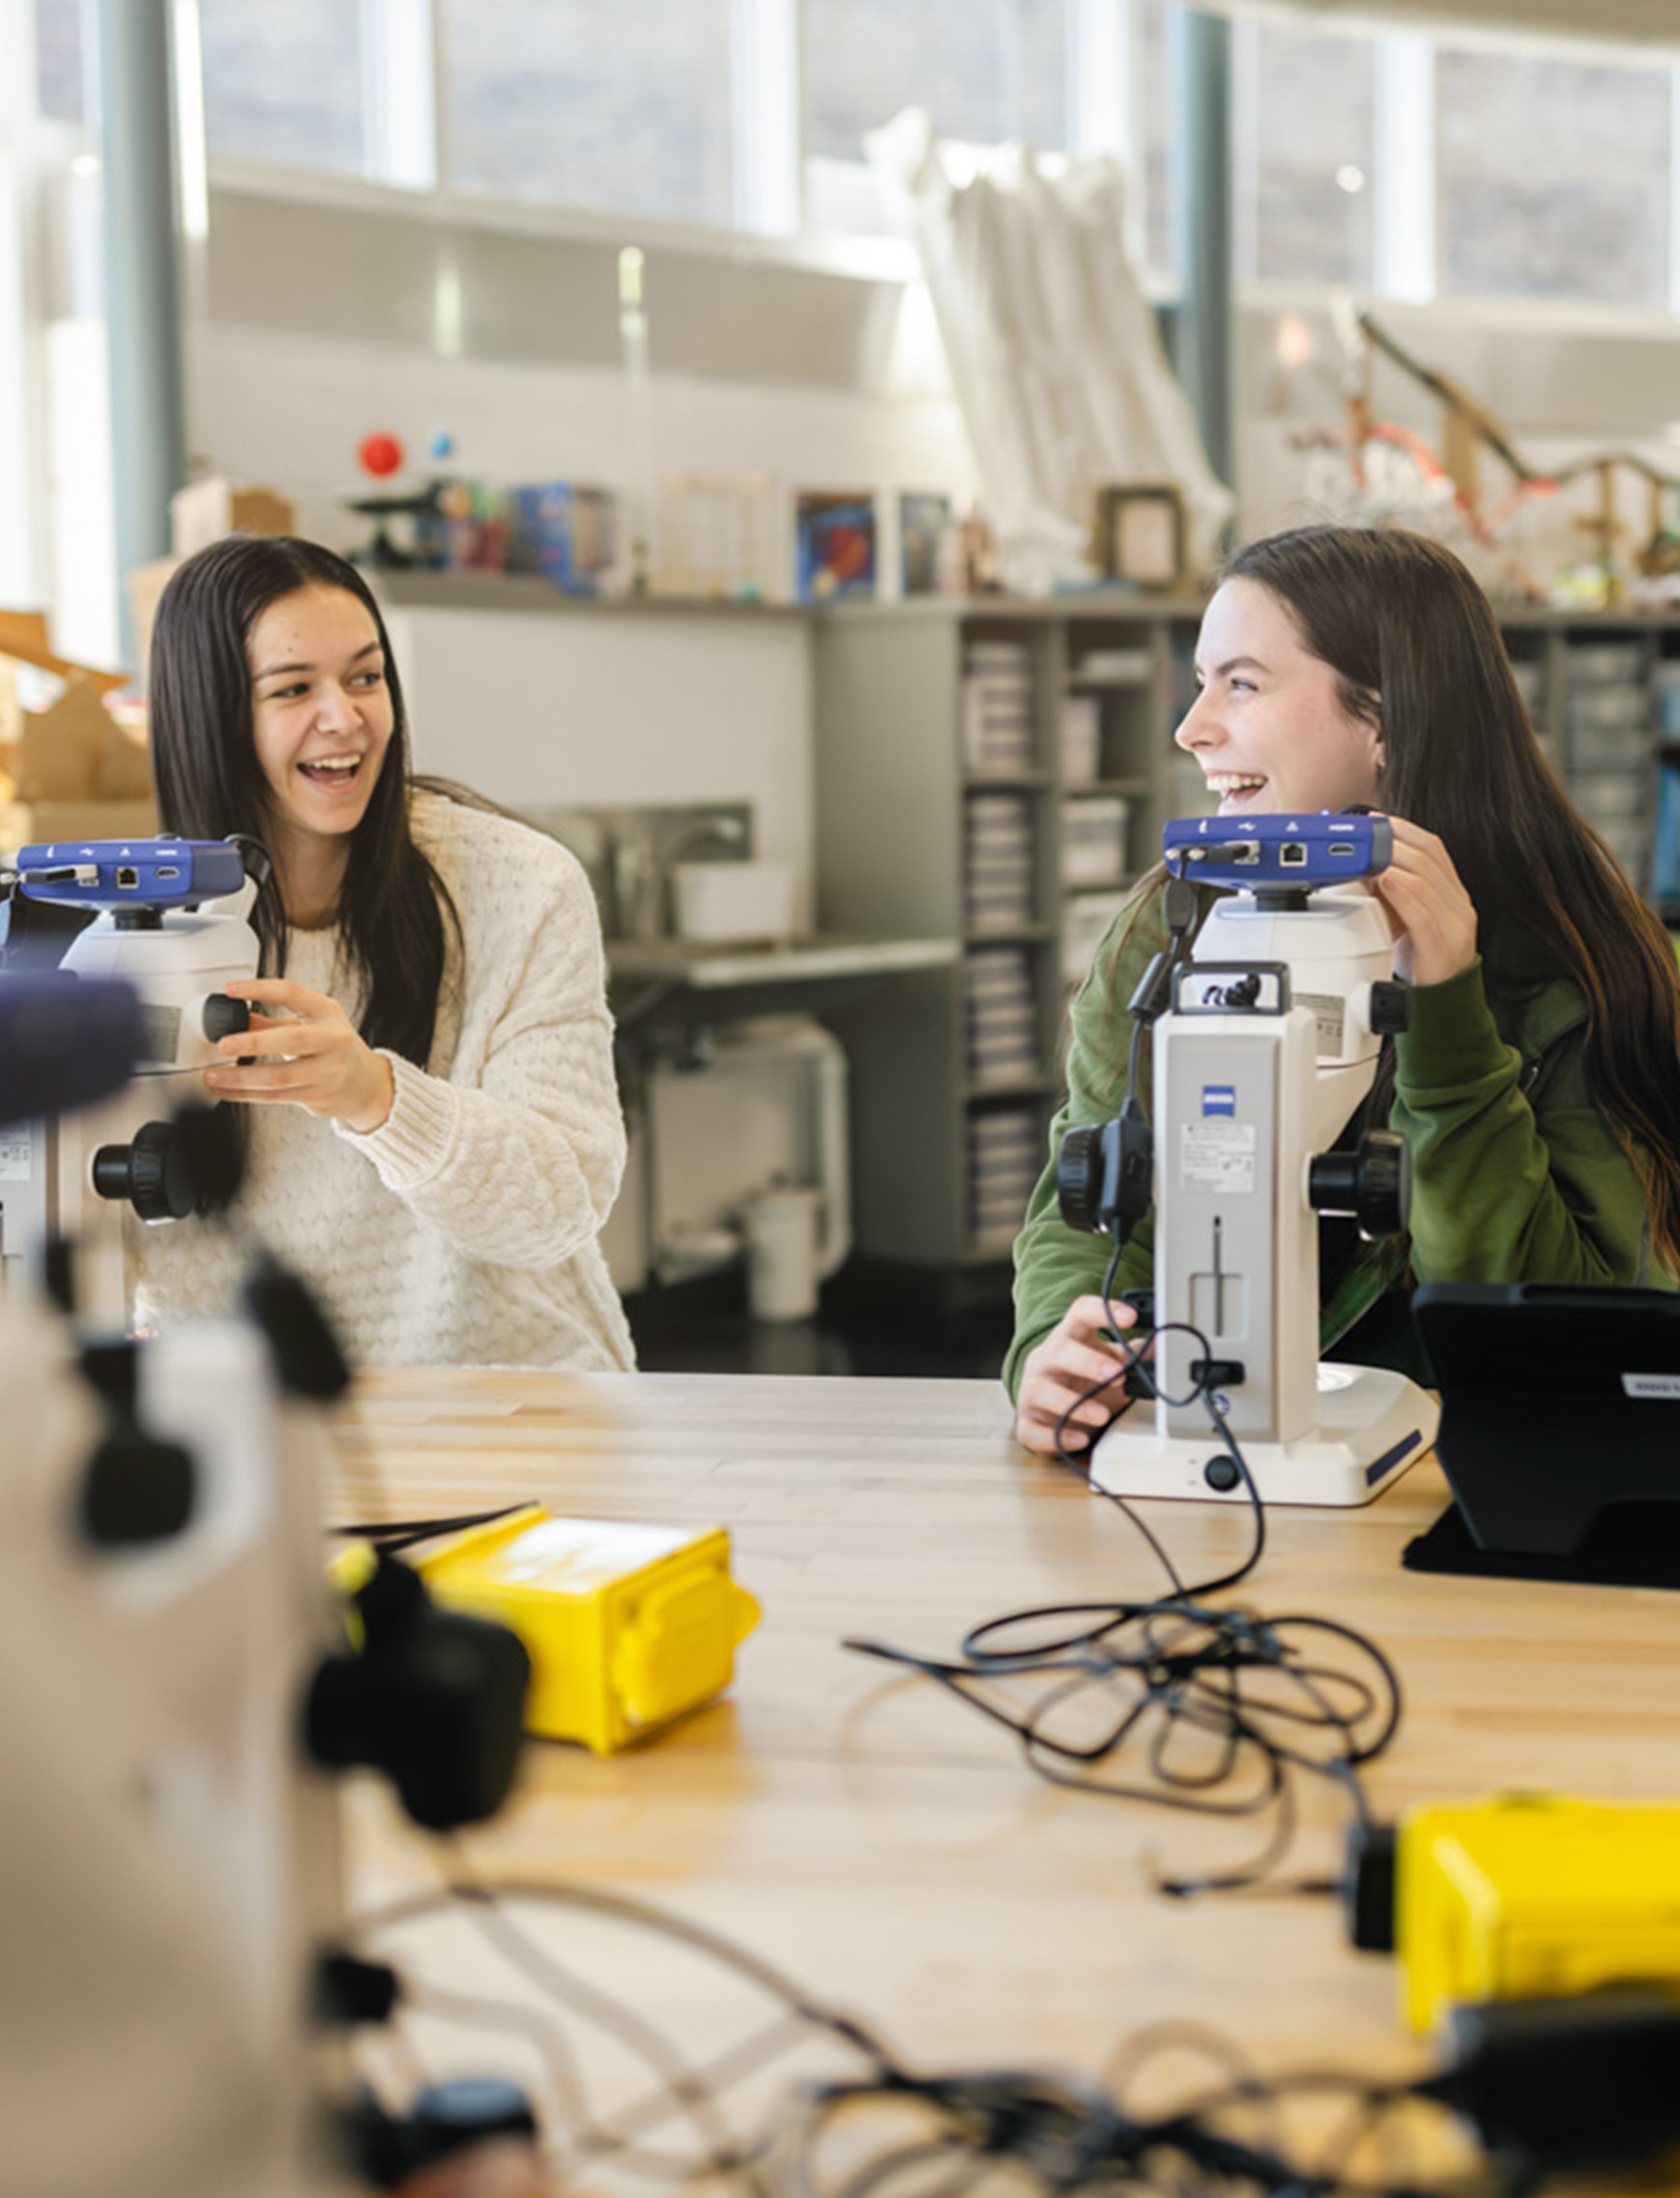 Two female students working in a science classroom